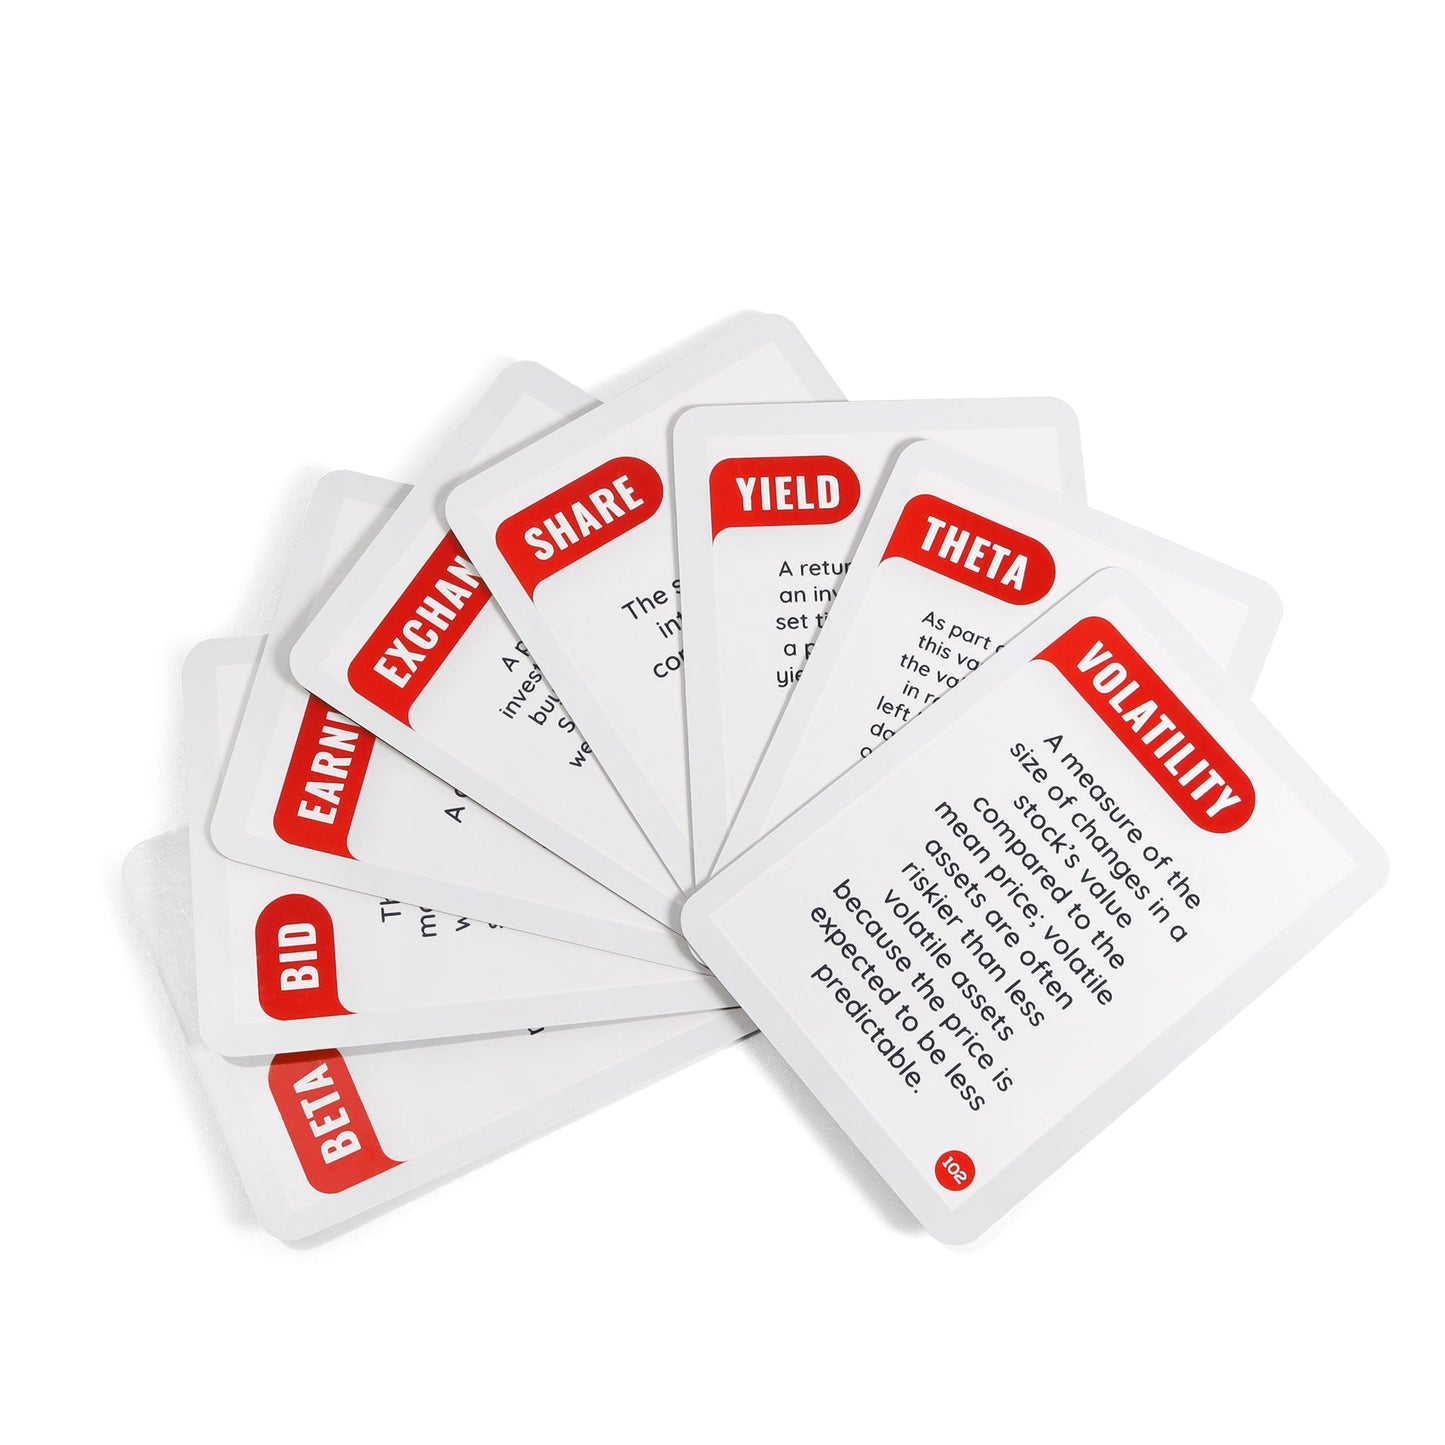 Clearance: 100 Stock Trading Words & Terms Every Investor Should Know Deluxe Flashcard Set_1st Gen